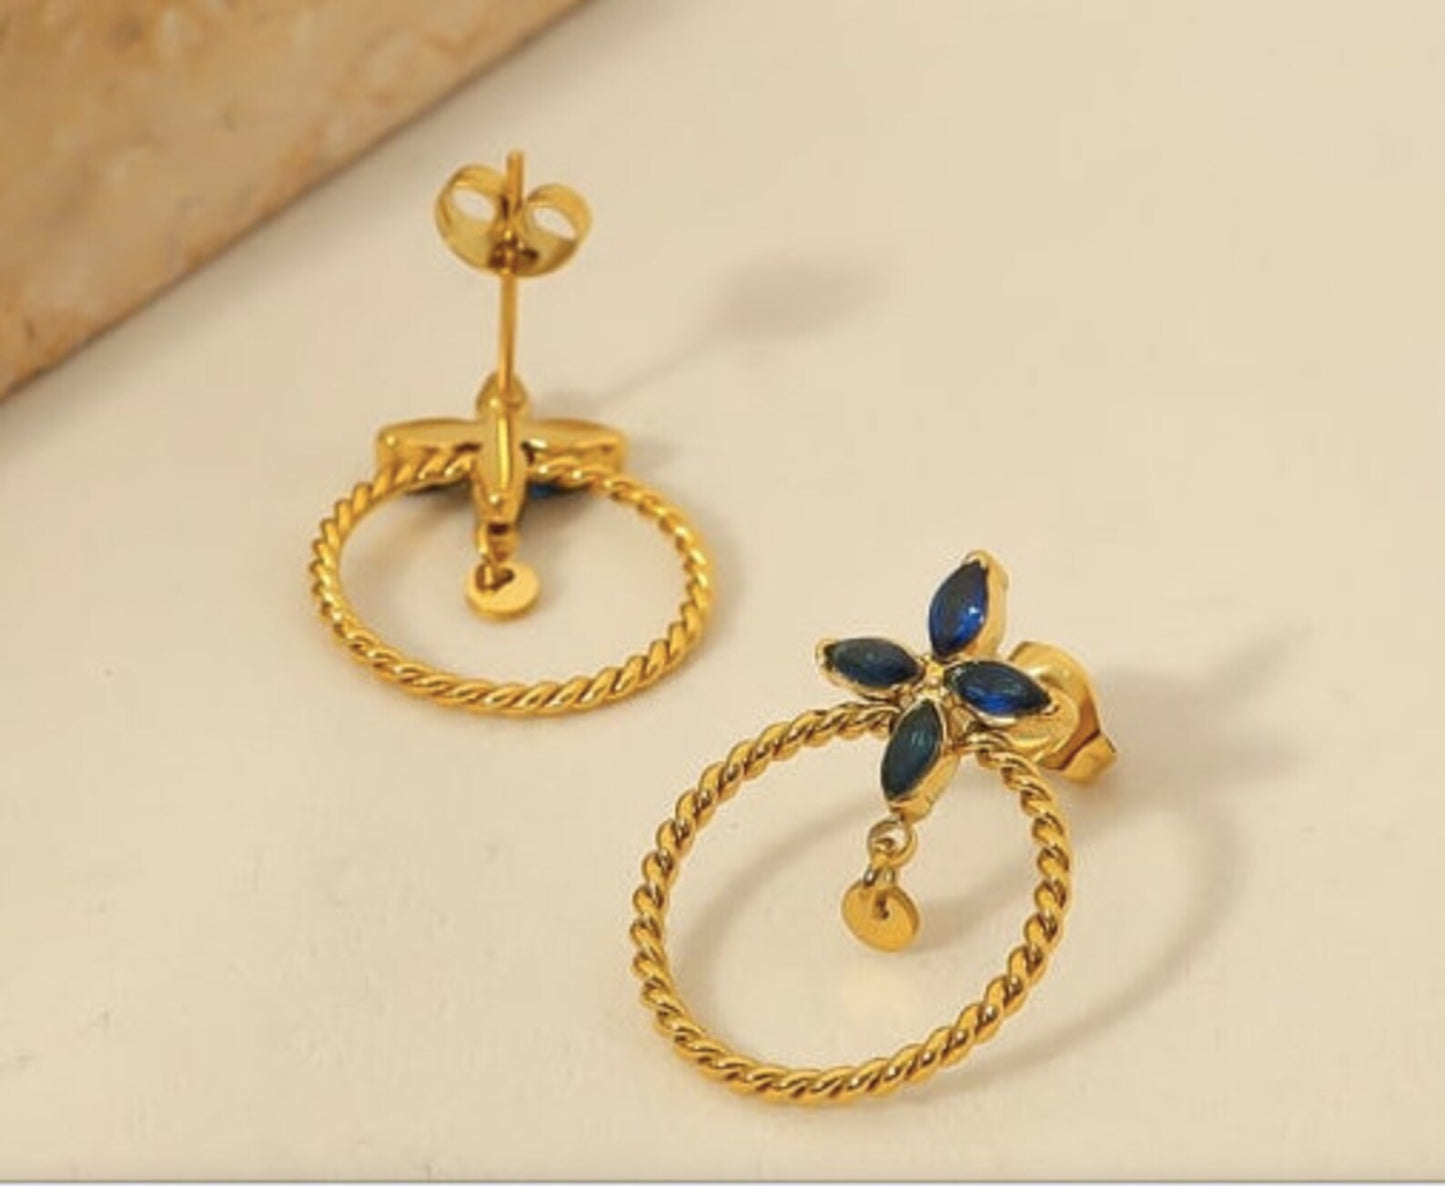 Round Gold Rope Minimalist Four Leaf Clover Earrings